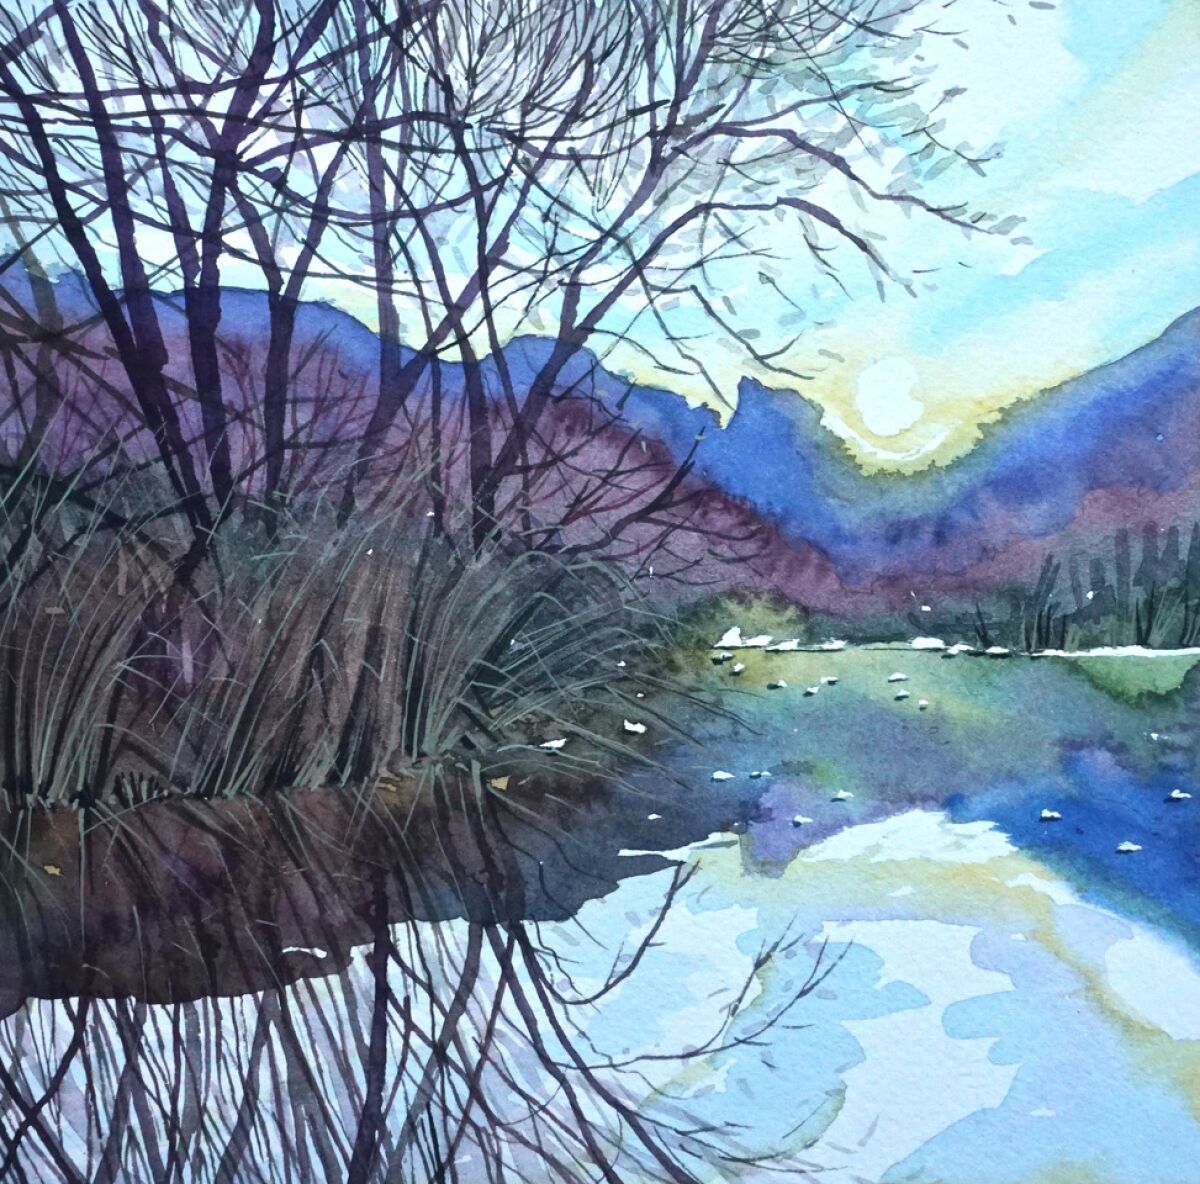 In a watercolor, mountains, setting sun and tree limbs are reflected in a body of water.